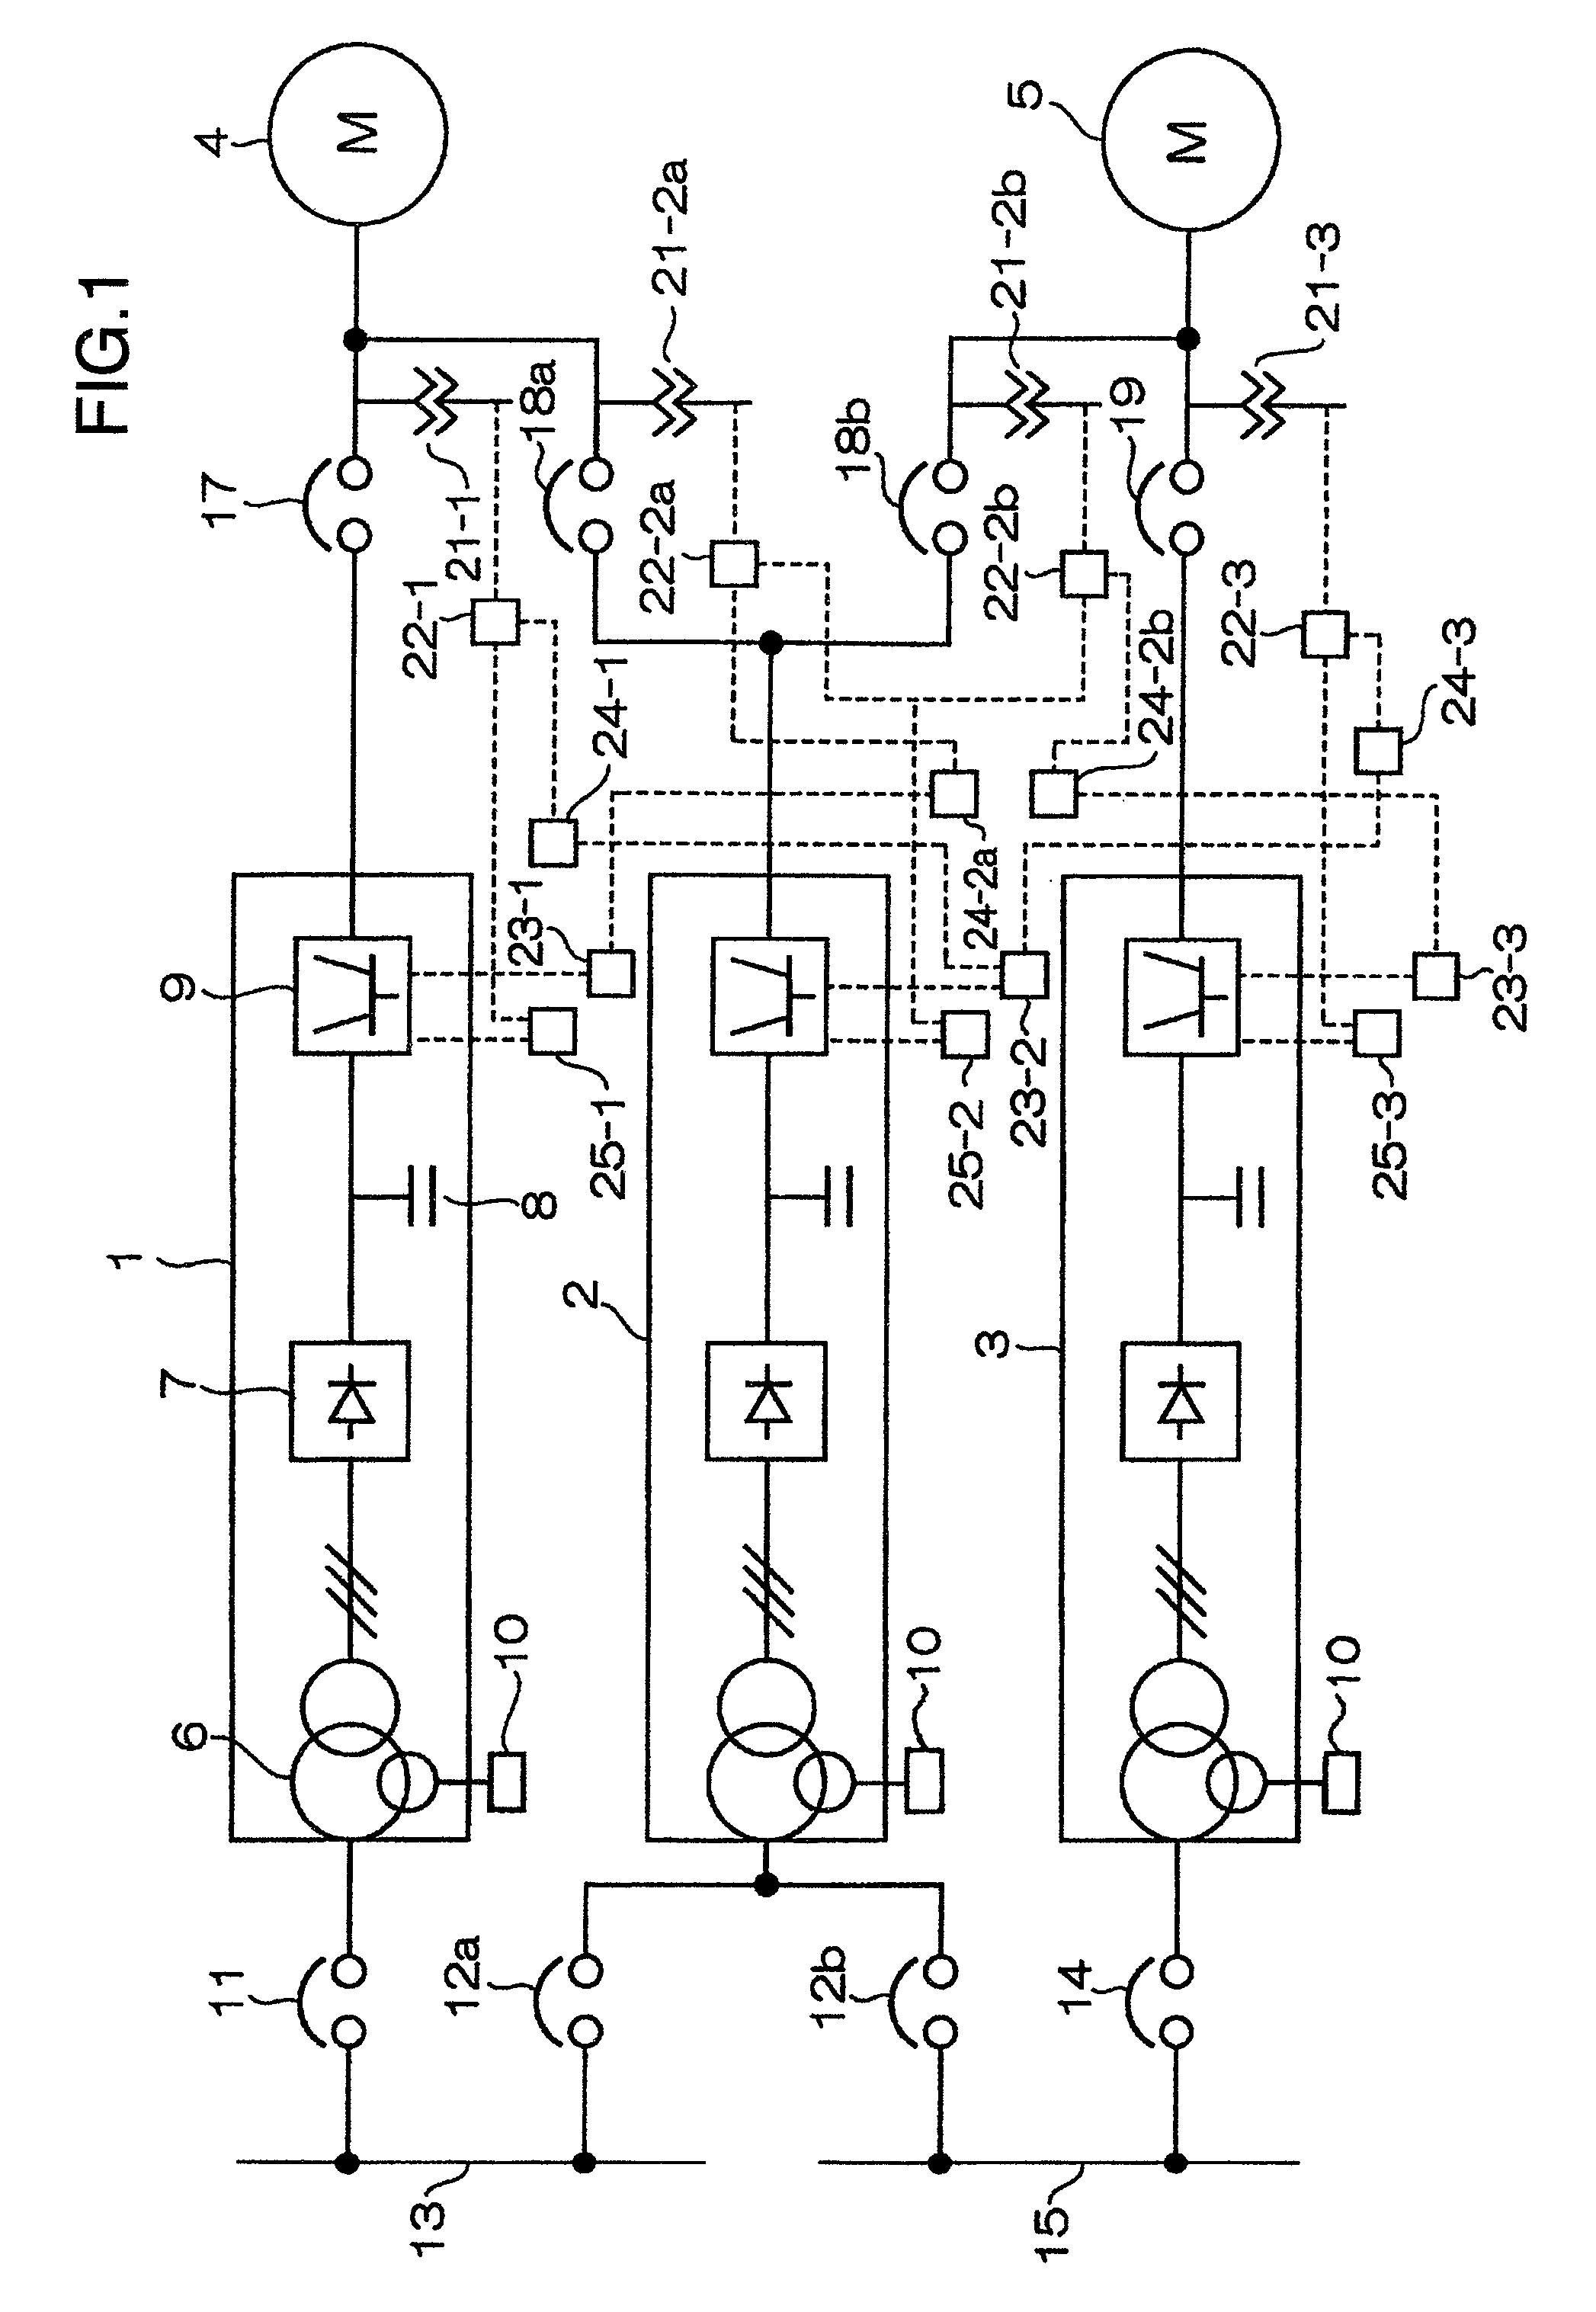 Apparatus and method for driving an induction motor